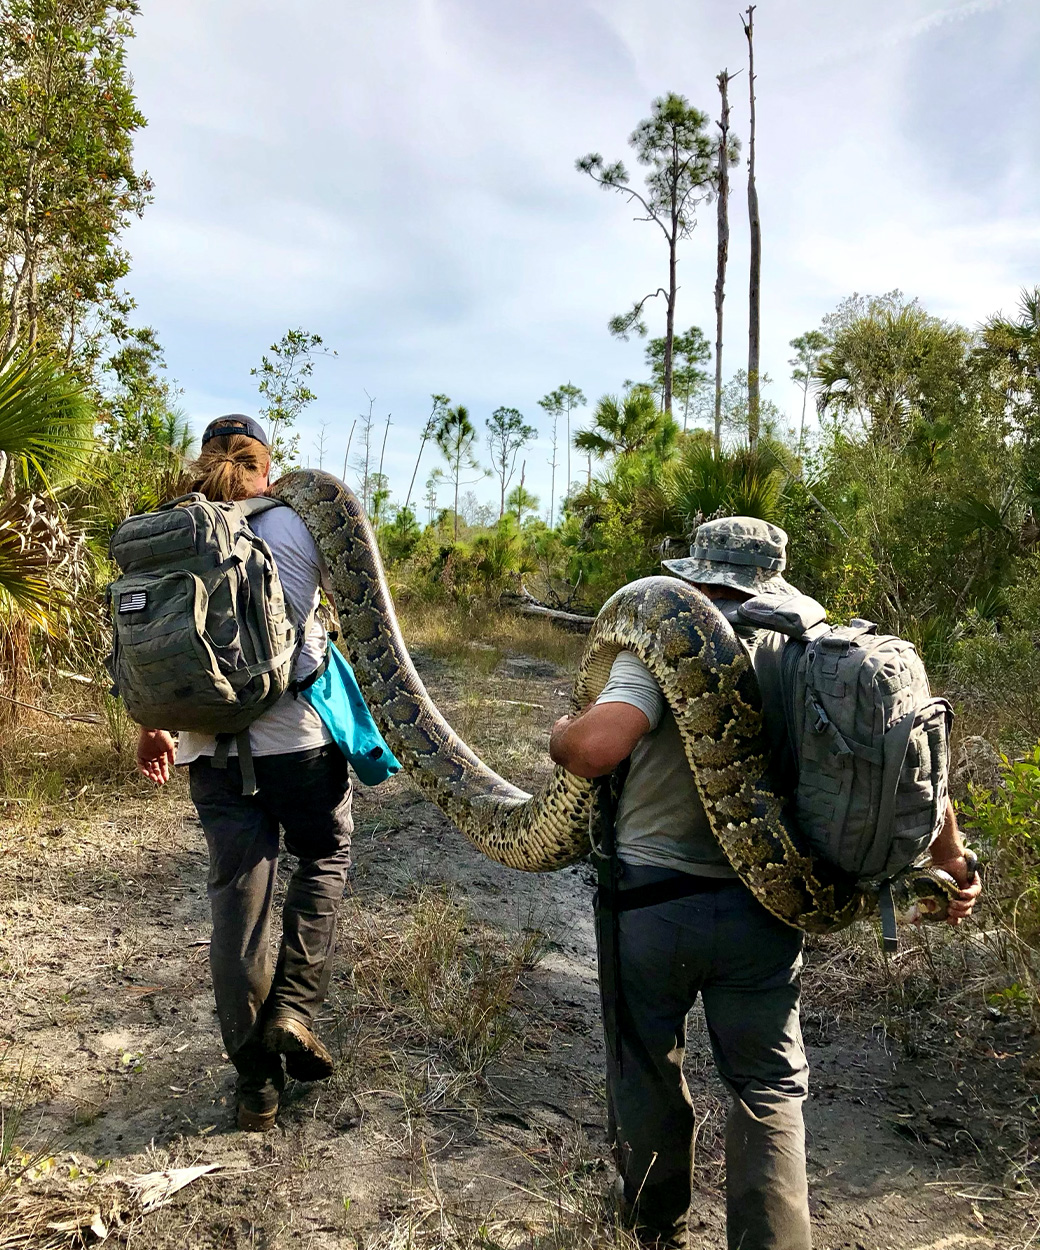 Two men carry out a large python over their shoulders.